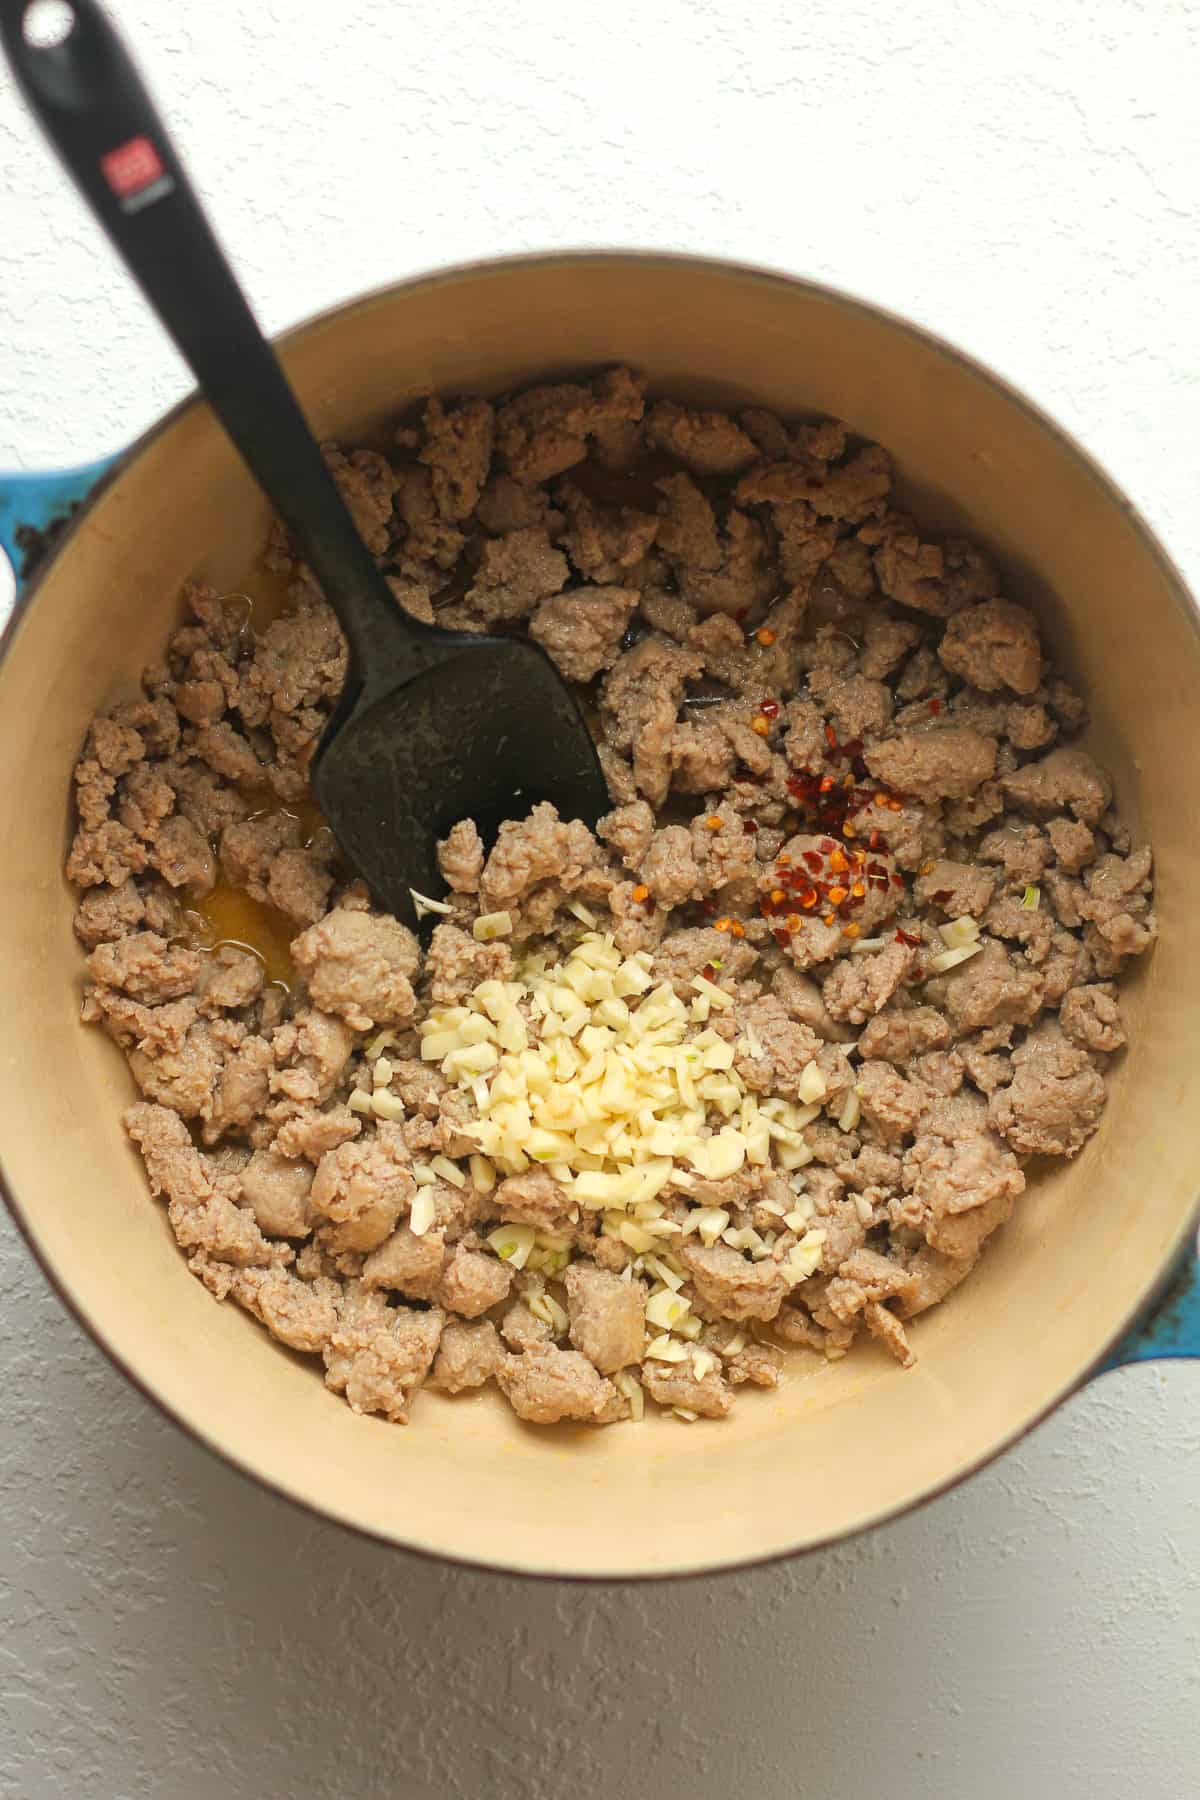 A pot of the cooked turkey sausage with garlic and seasoning on top.